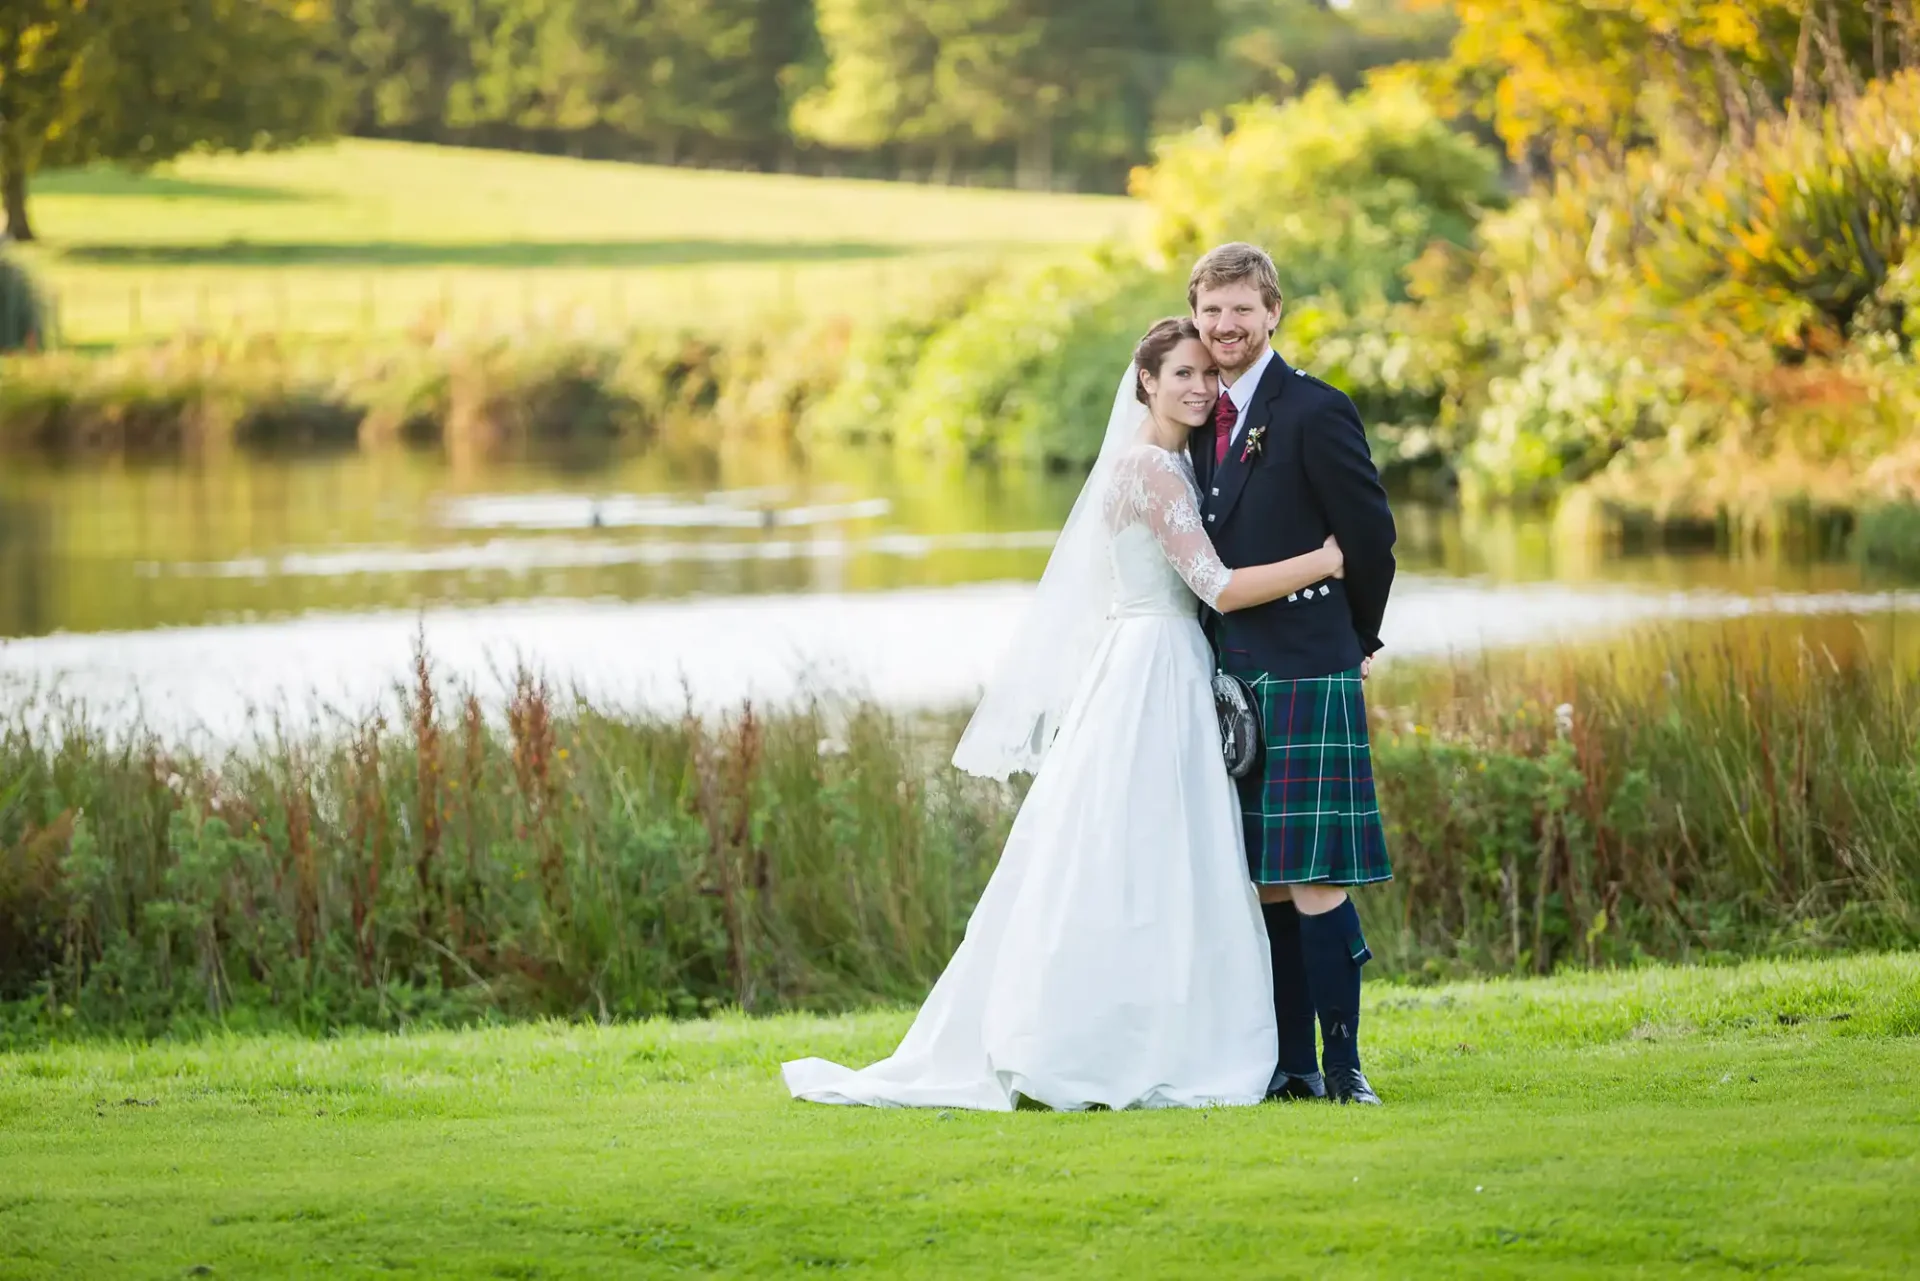 A bride in a white dress and a groom in a kilt embracing near a pond with greenery in the background.